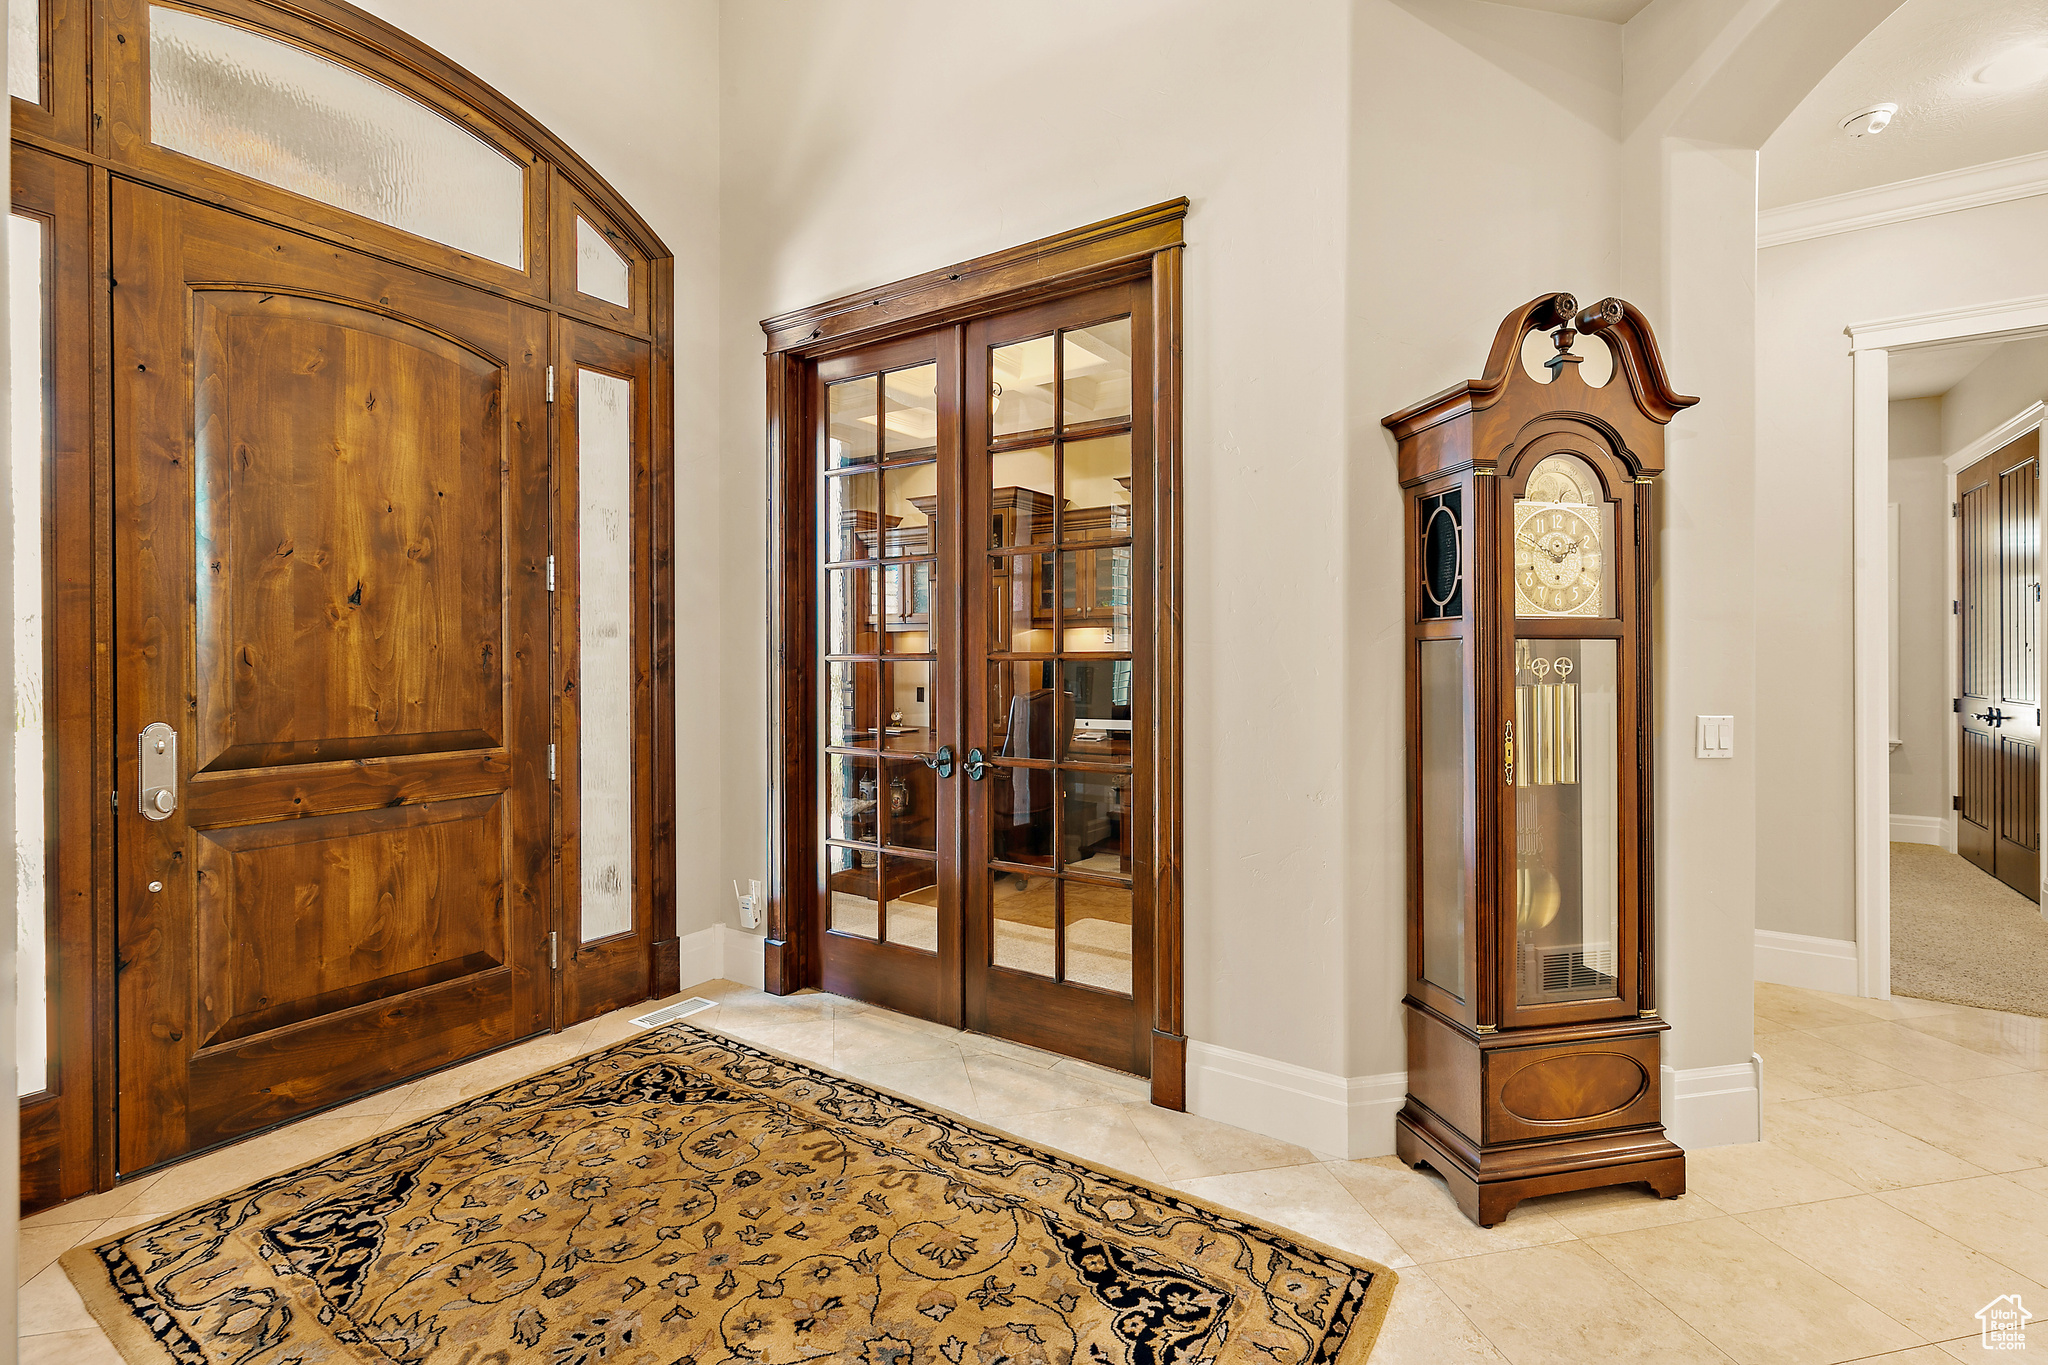 Entrance foyer featuring french doors, crown molding, and light tile floors